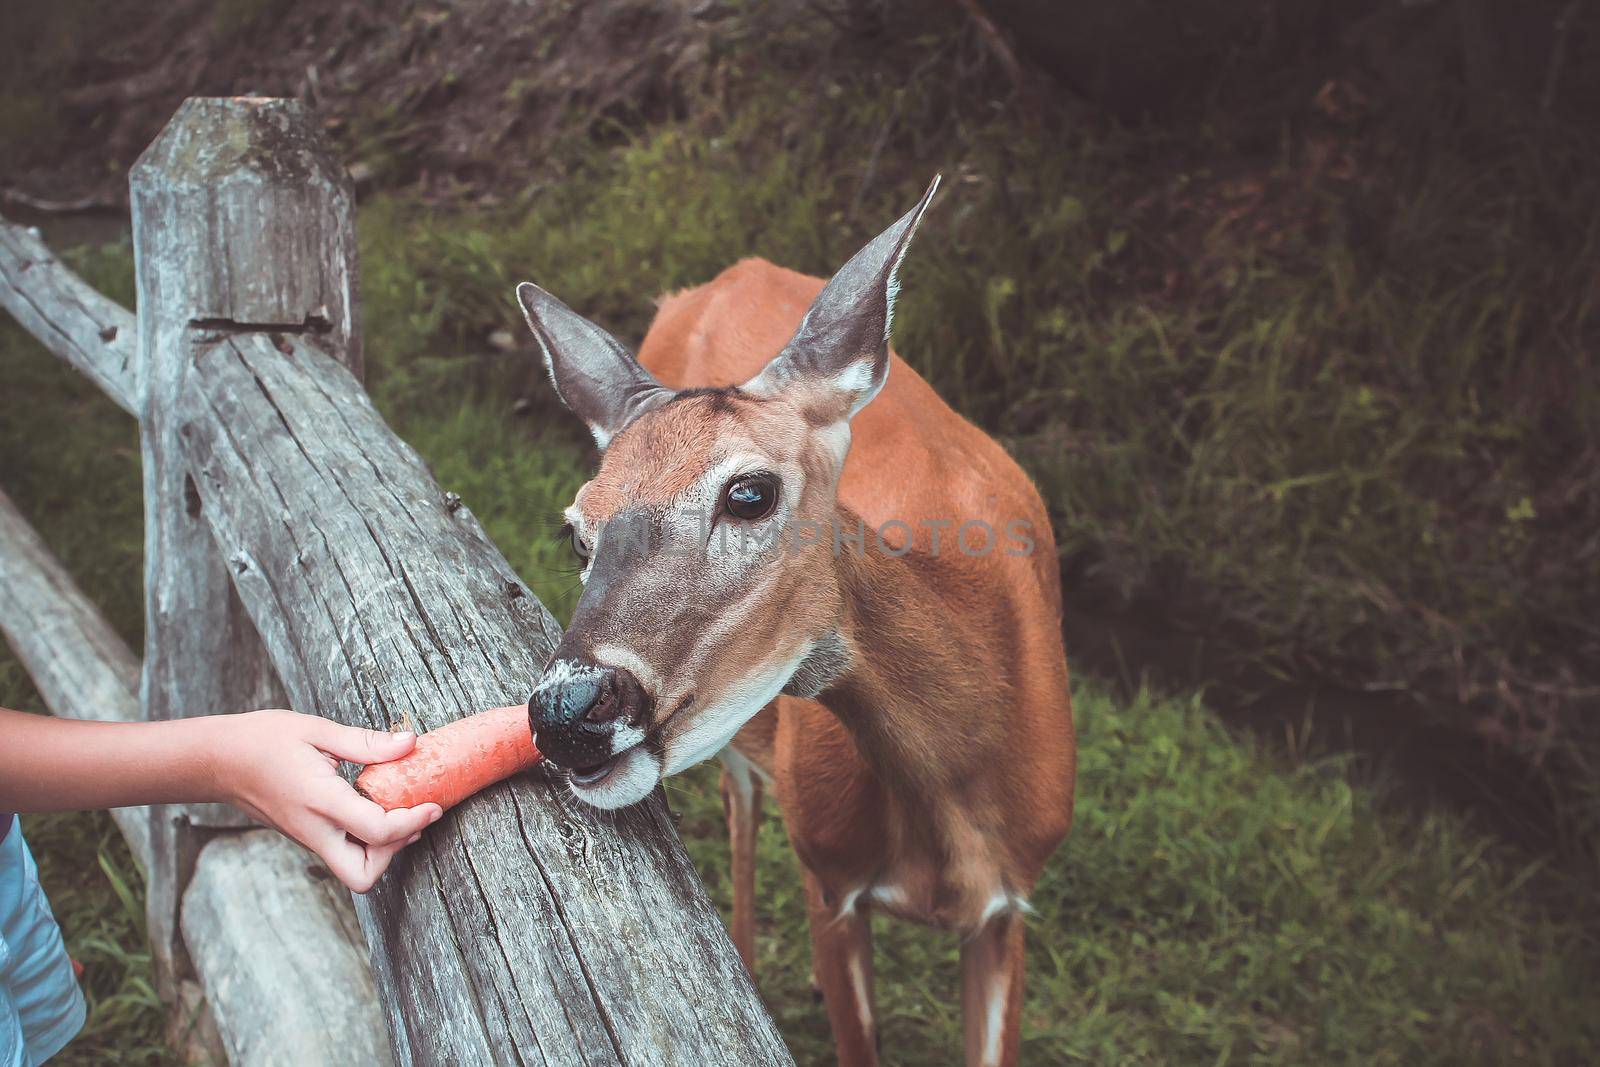 Feeding the deer in the zoo. The deer in the fence eat a carrot piece, fed by the child's hand